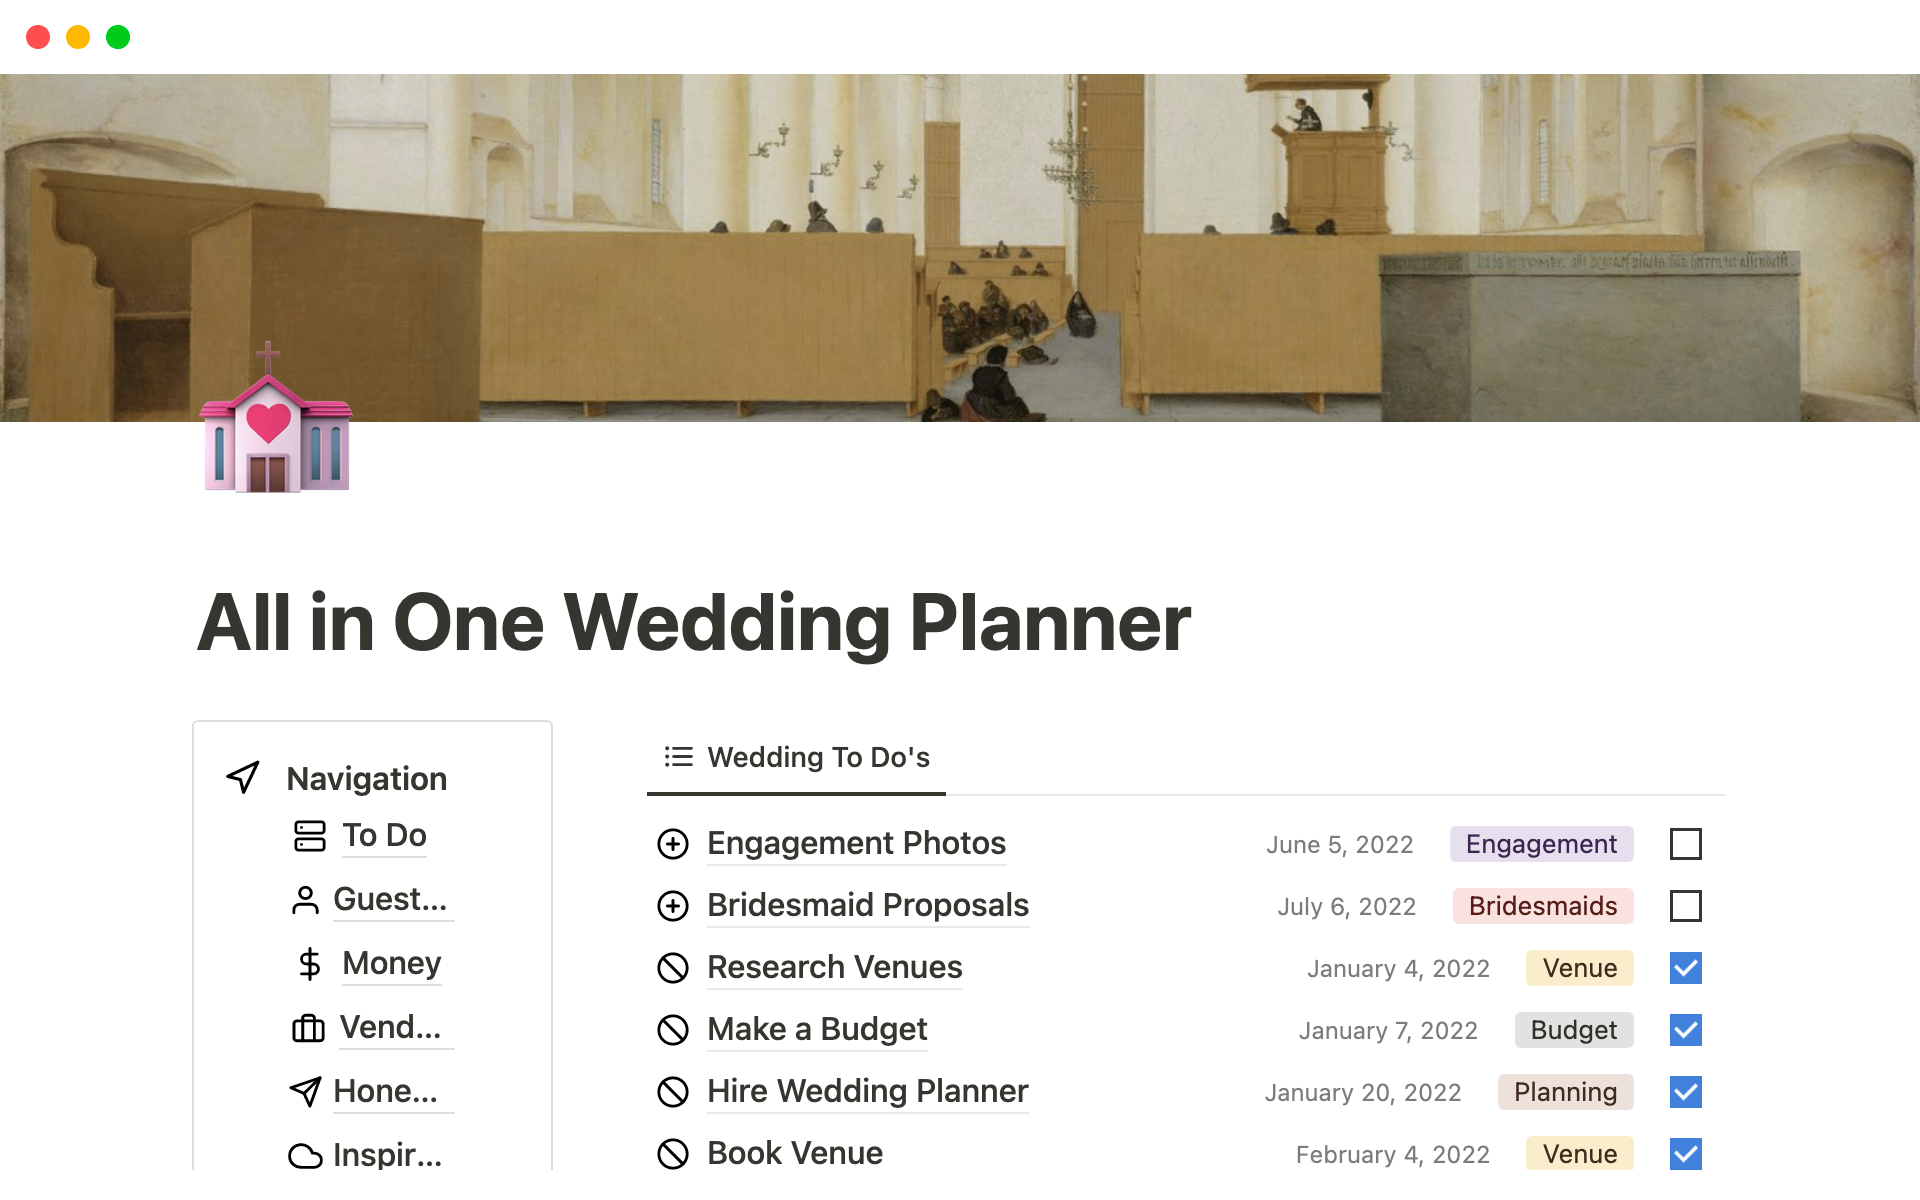 Our All in One Wedding Planner Notion Template can help simplify the process and make planning your dream wedding a breeze.